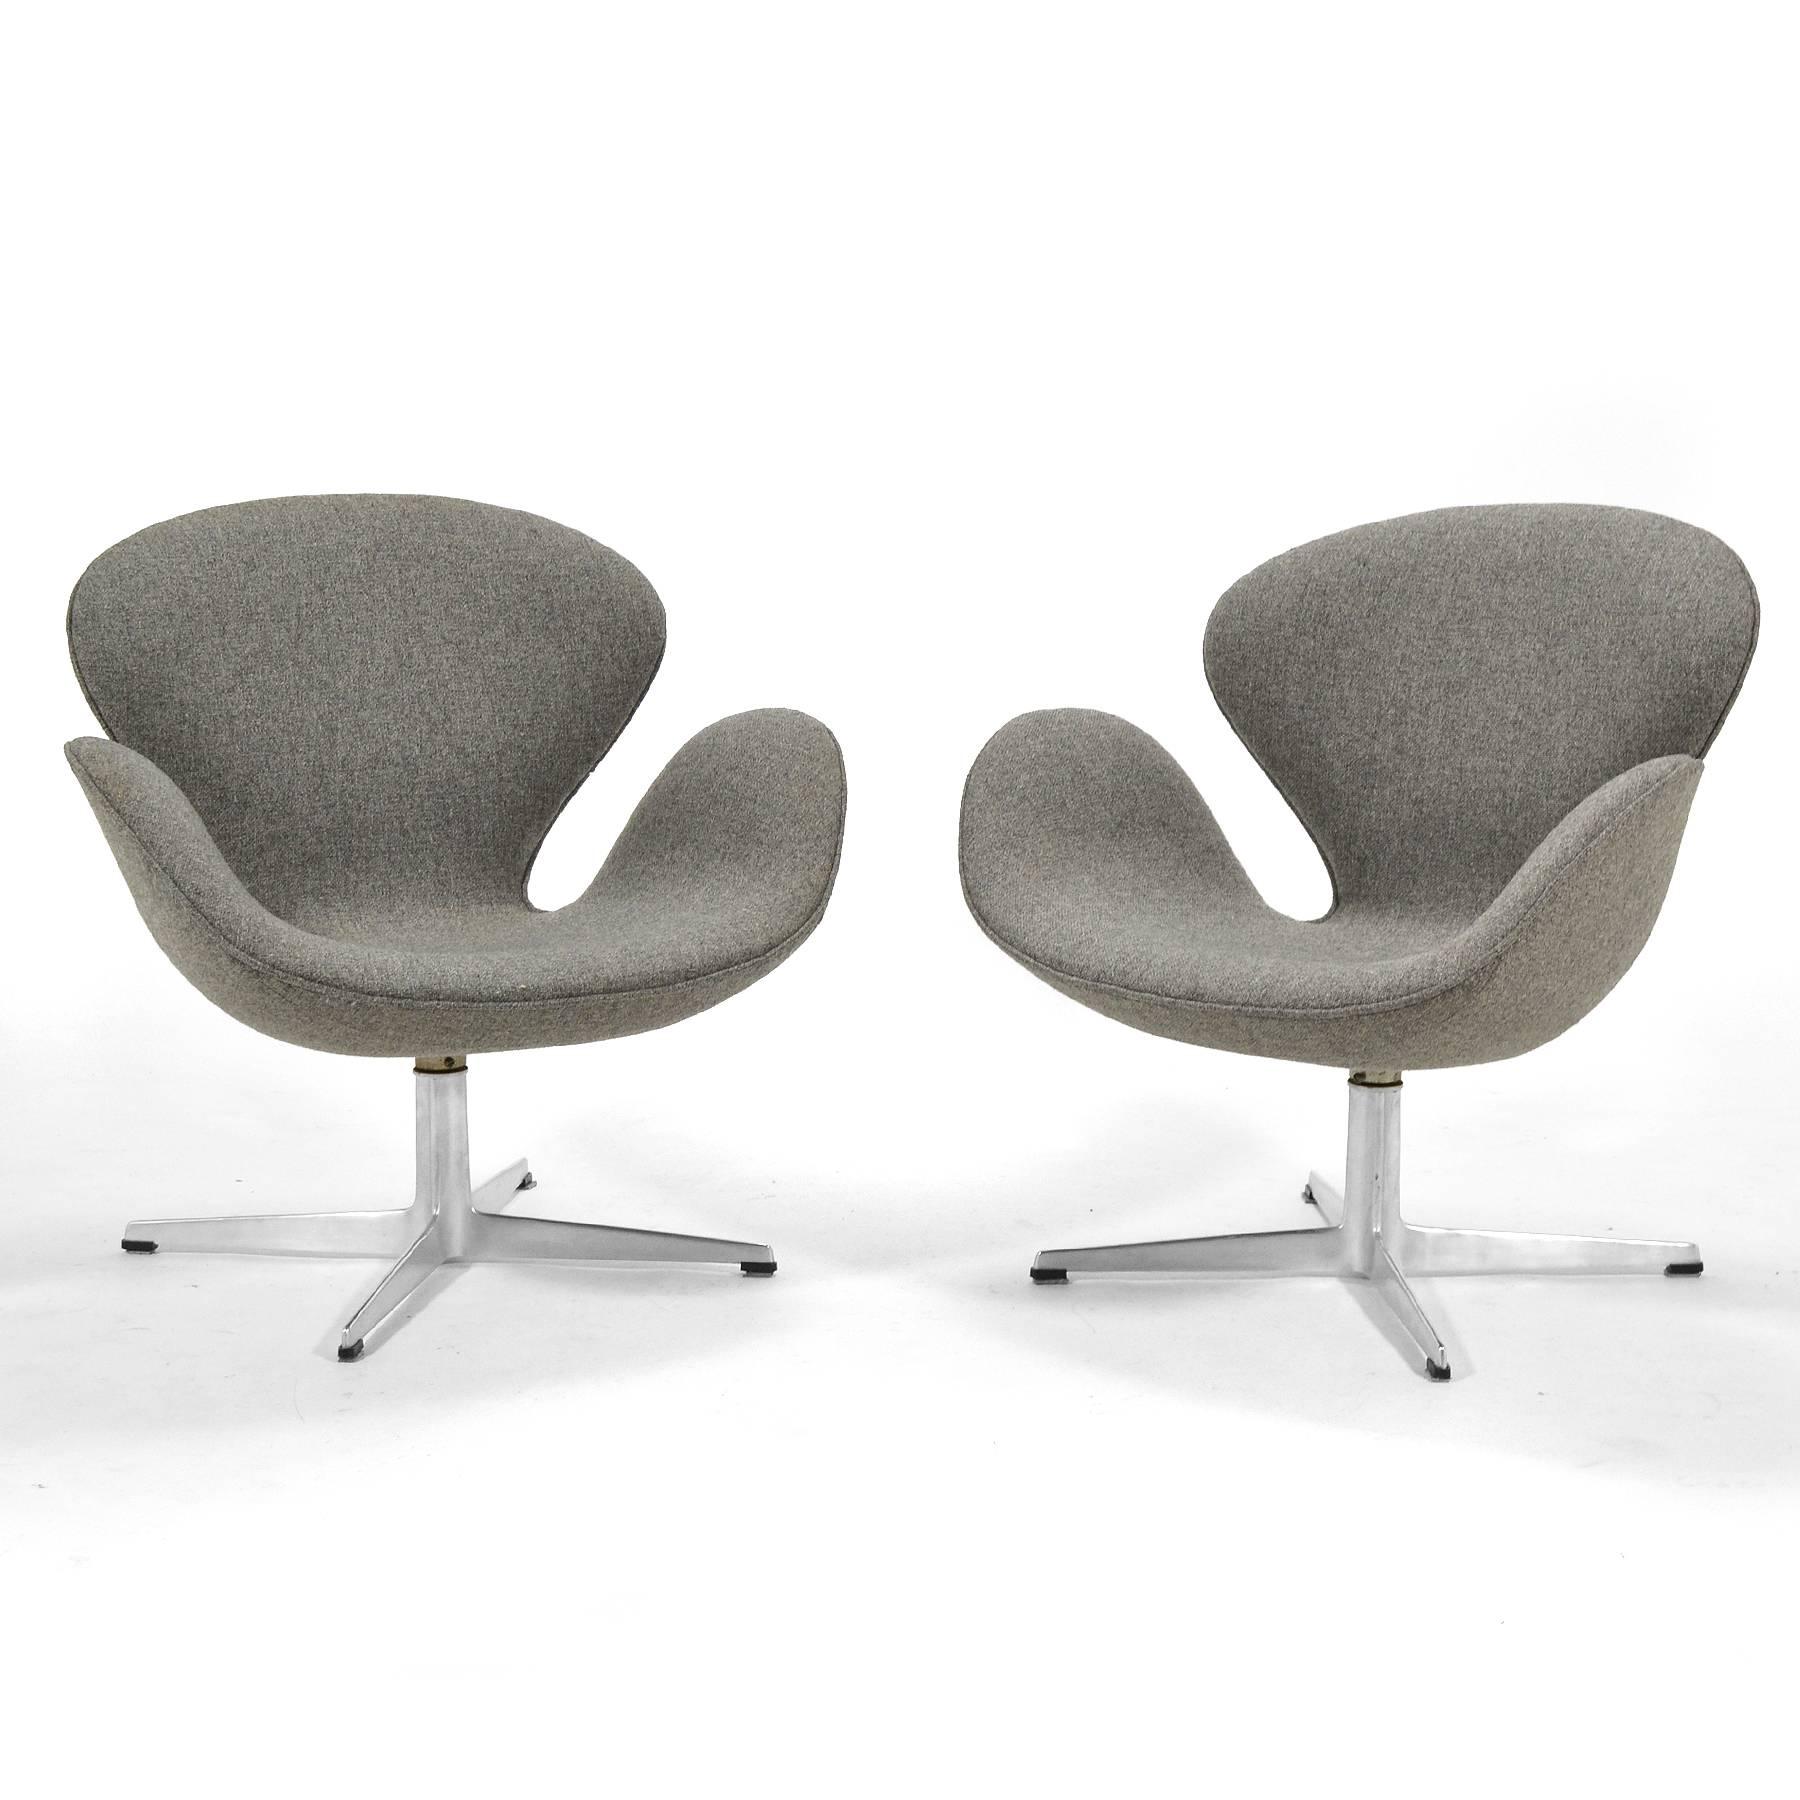 Arne Jacobsen designed the Swan chair for the lobby of the SAS Hotel in Copenhagen. It was an immediate sensation and has become an icon of mid-century modern design. This lovely pair of vintage chairs by Fritz Hansen have the original one-piece